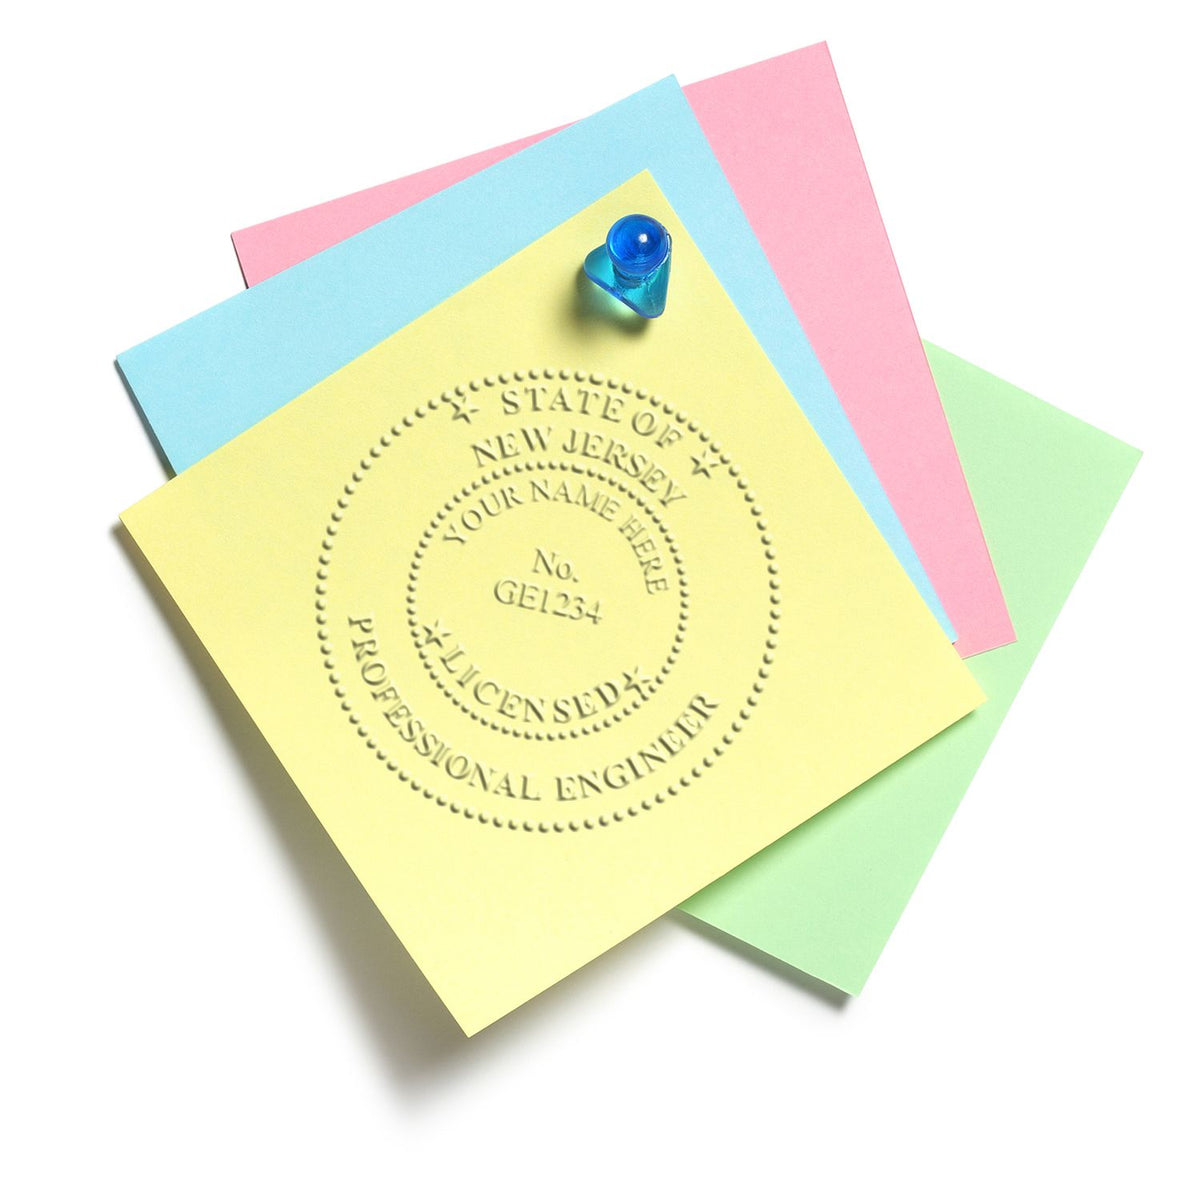 This paper is stamped with a sample imprint of the Soft New Jersey Professional Engineer Seal, signifying its quality and reliability.